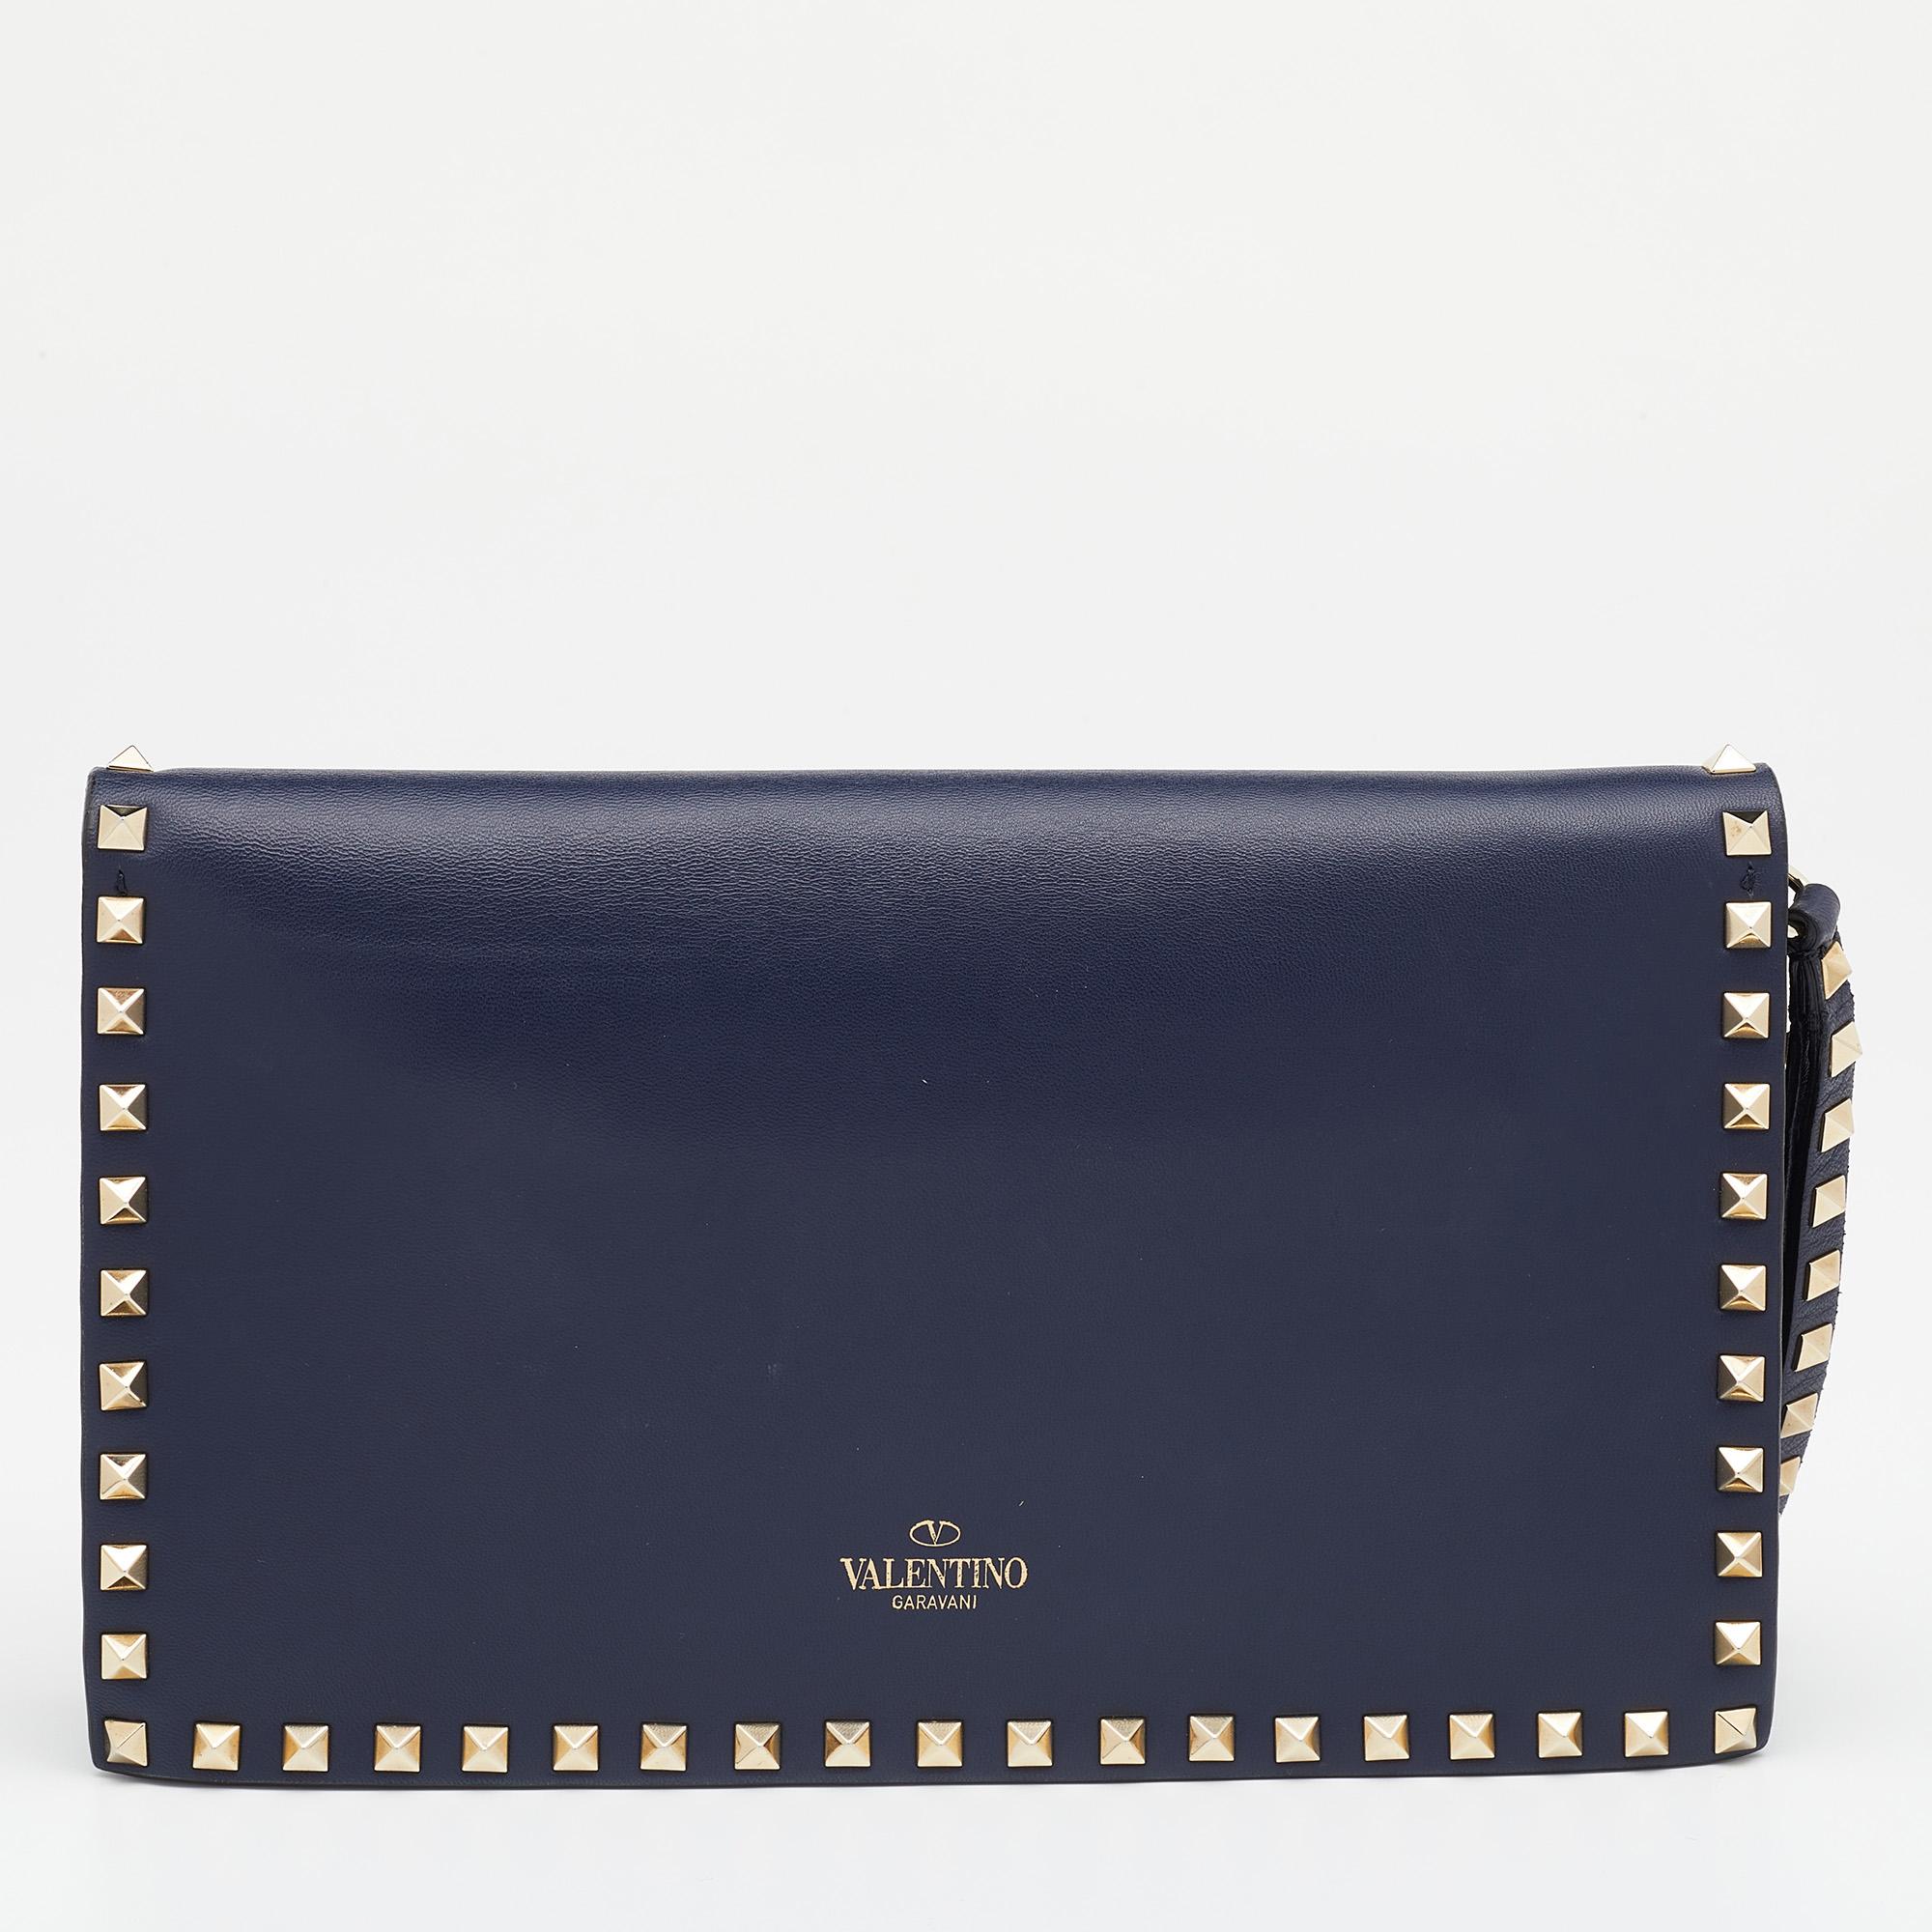 Very stylish and well-made, this black clutch by Valentino will offer you the signature aesthetics of the brand. Crafted from leather, the clutch is styled with a wristlet and adorned with the signature Rockstud accents on the exterior. It opens to